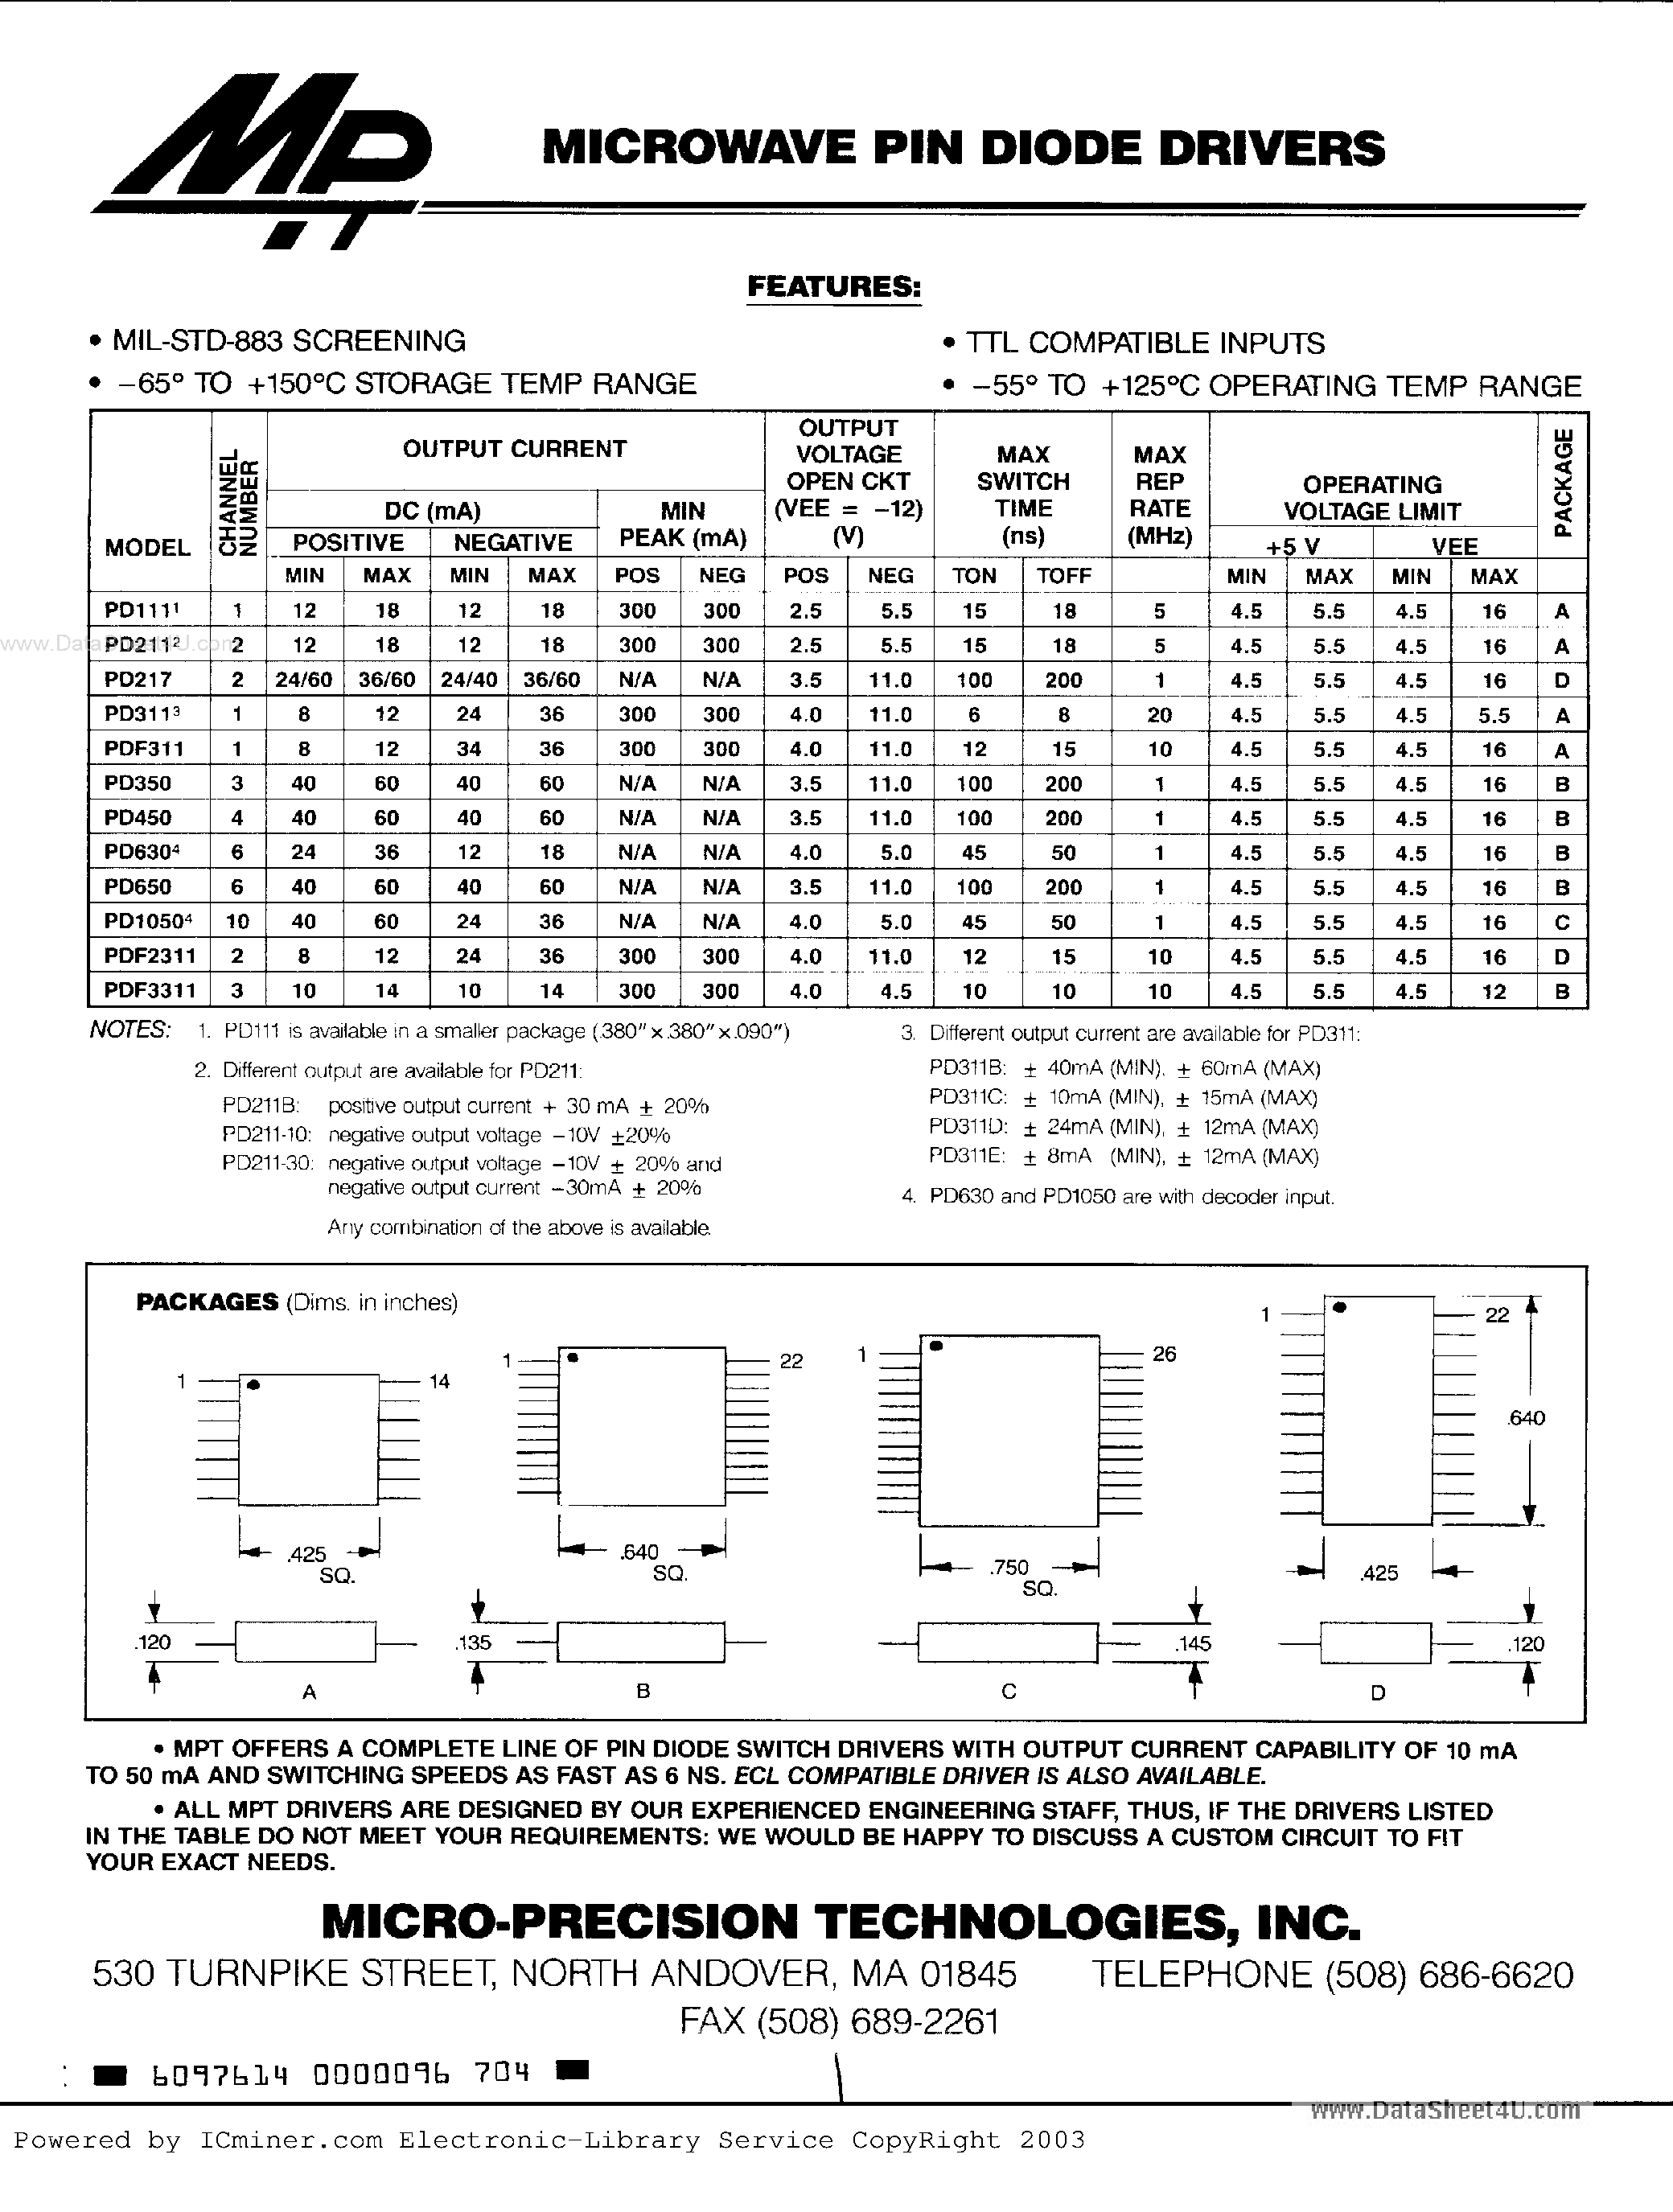 Datasheet PD111 - Microwave Pin Diode Drivers page 1